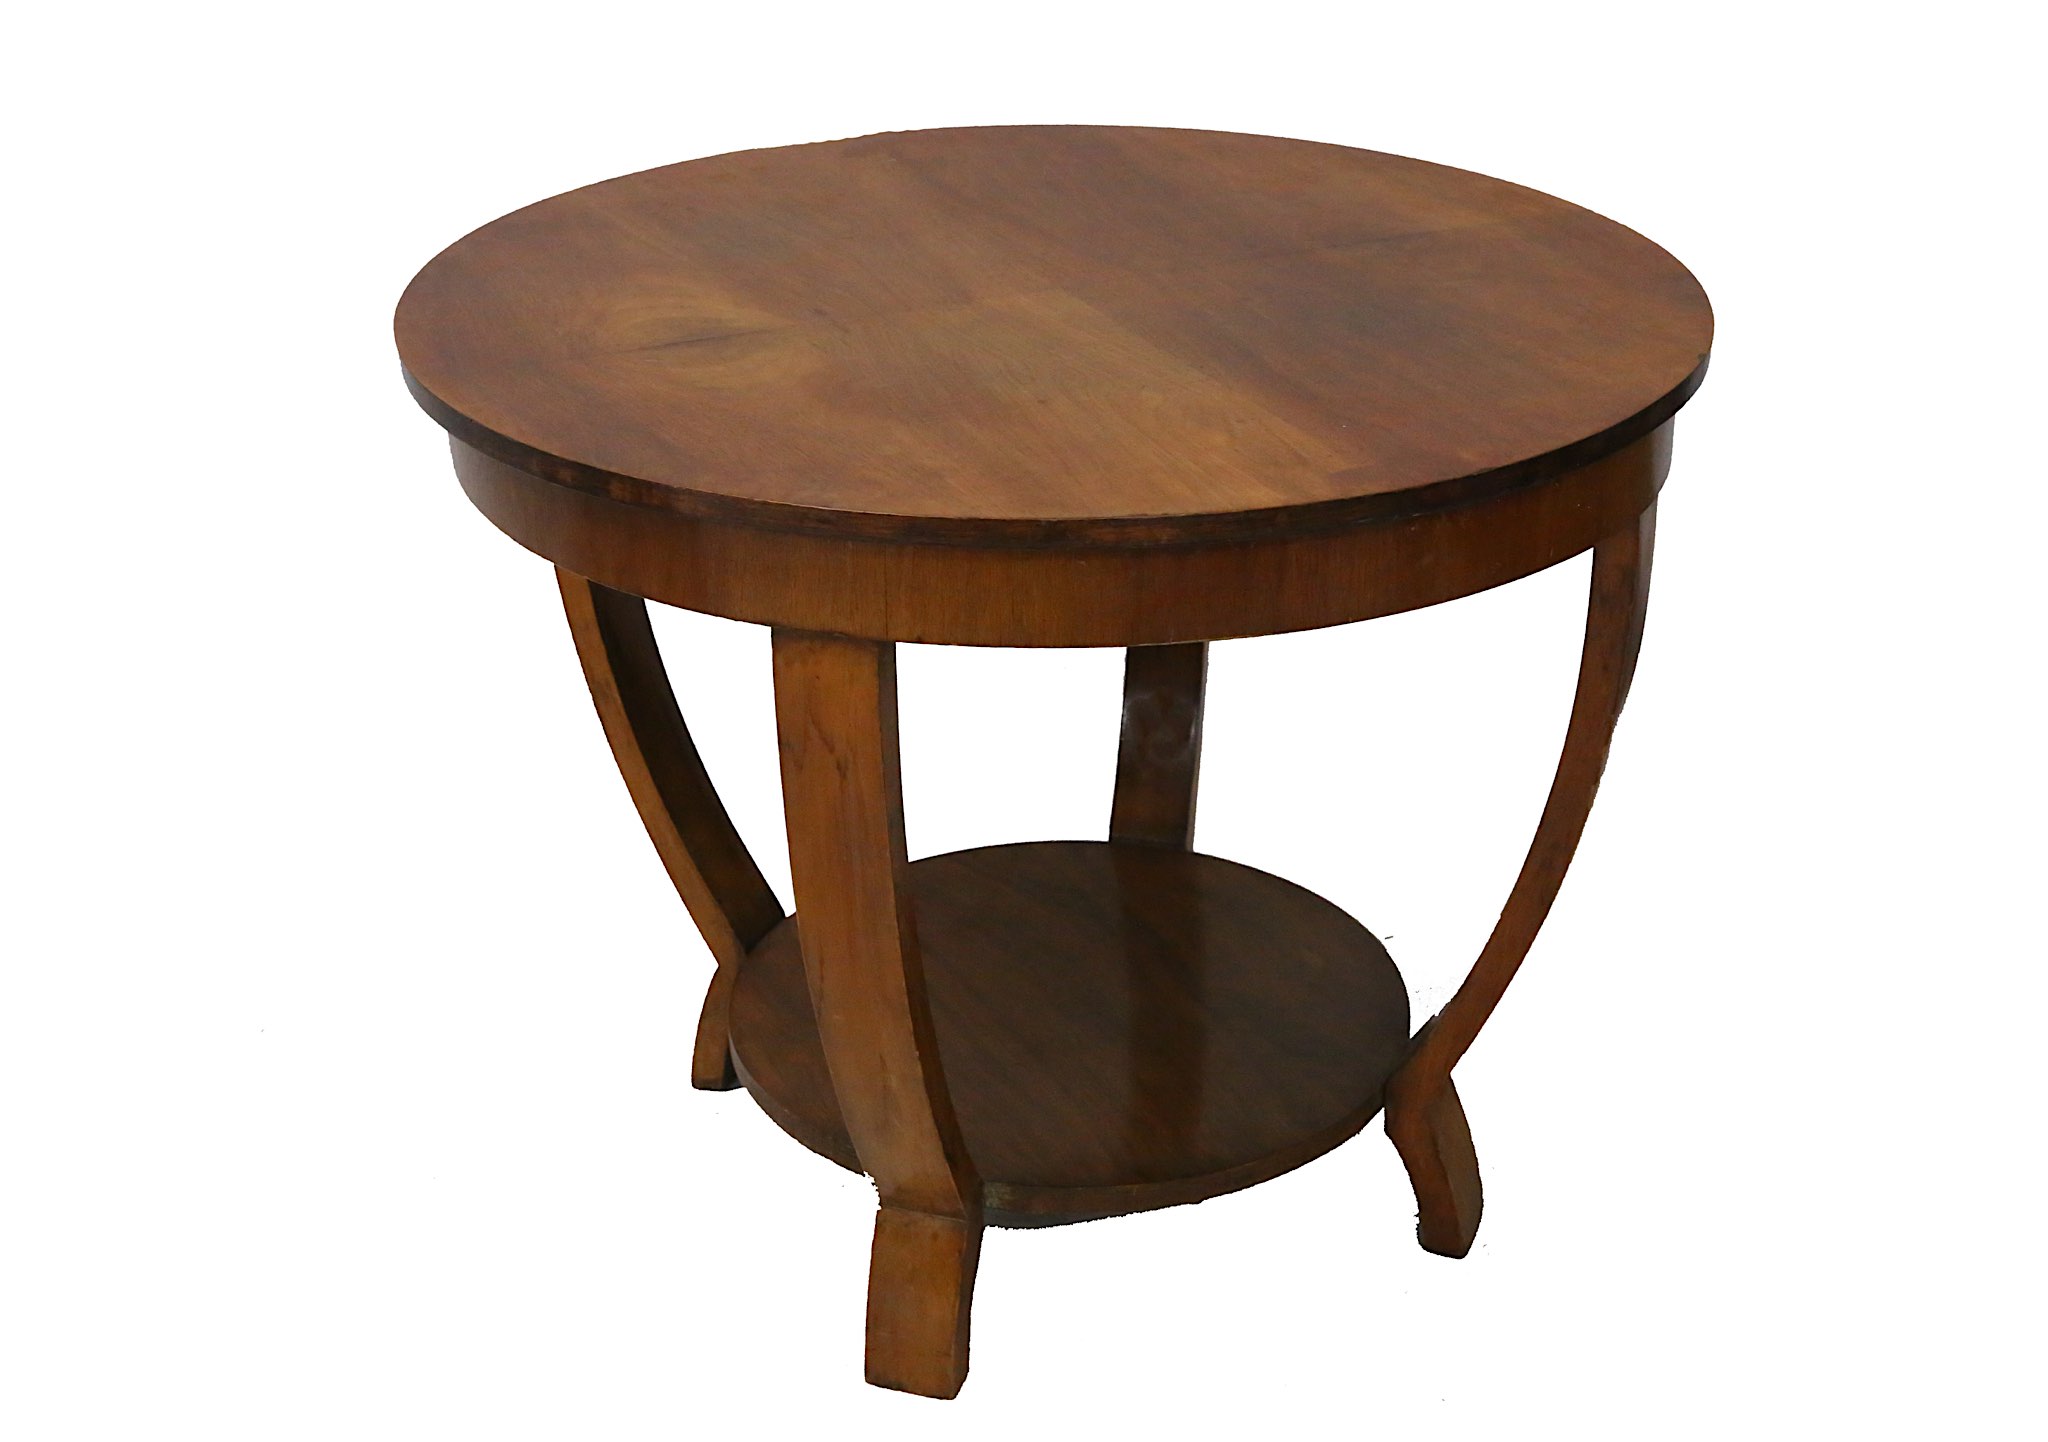 An Art Deco style figured walnut two-tier circular occaisional table, 20th century